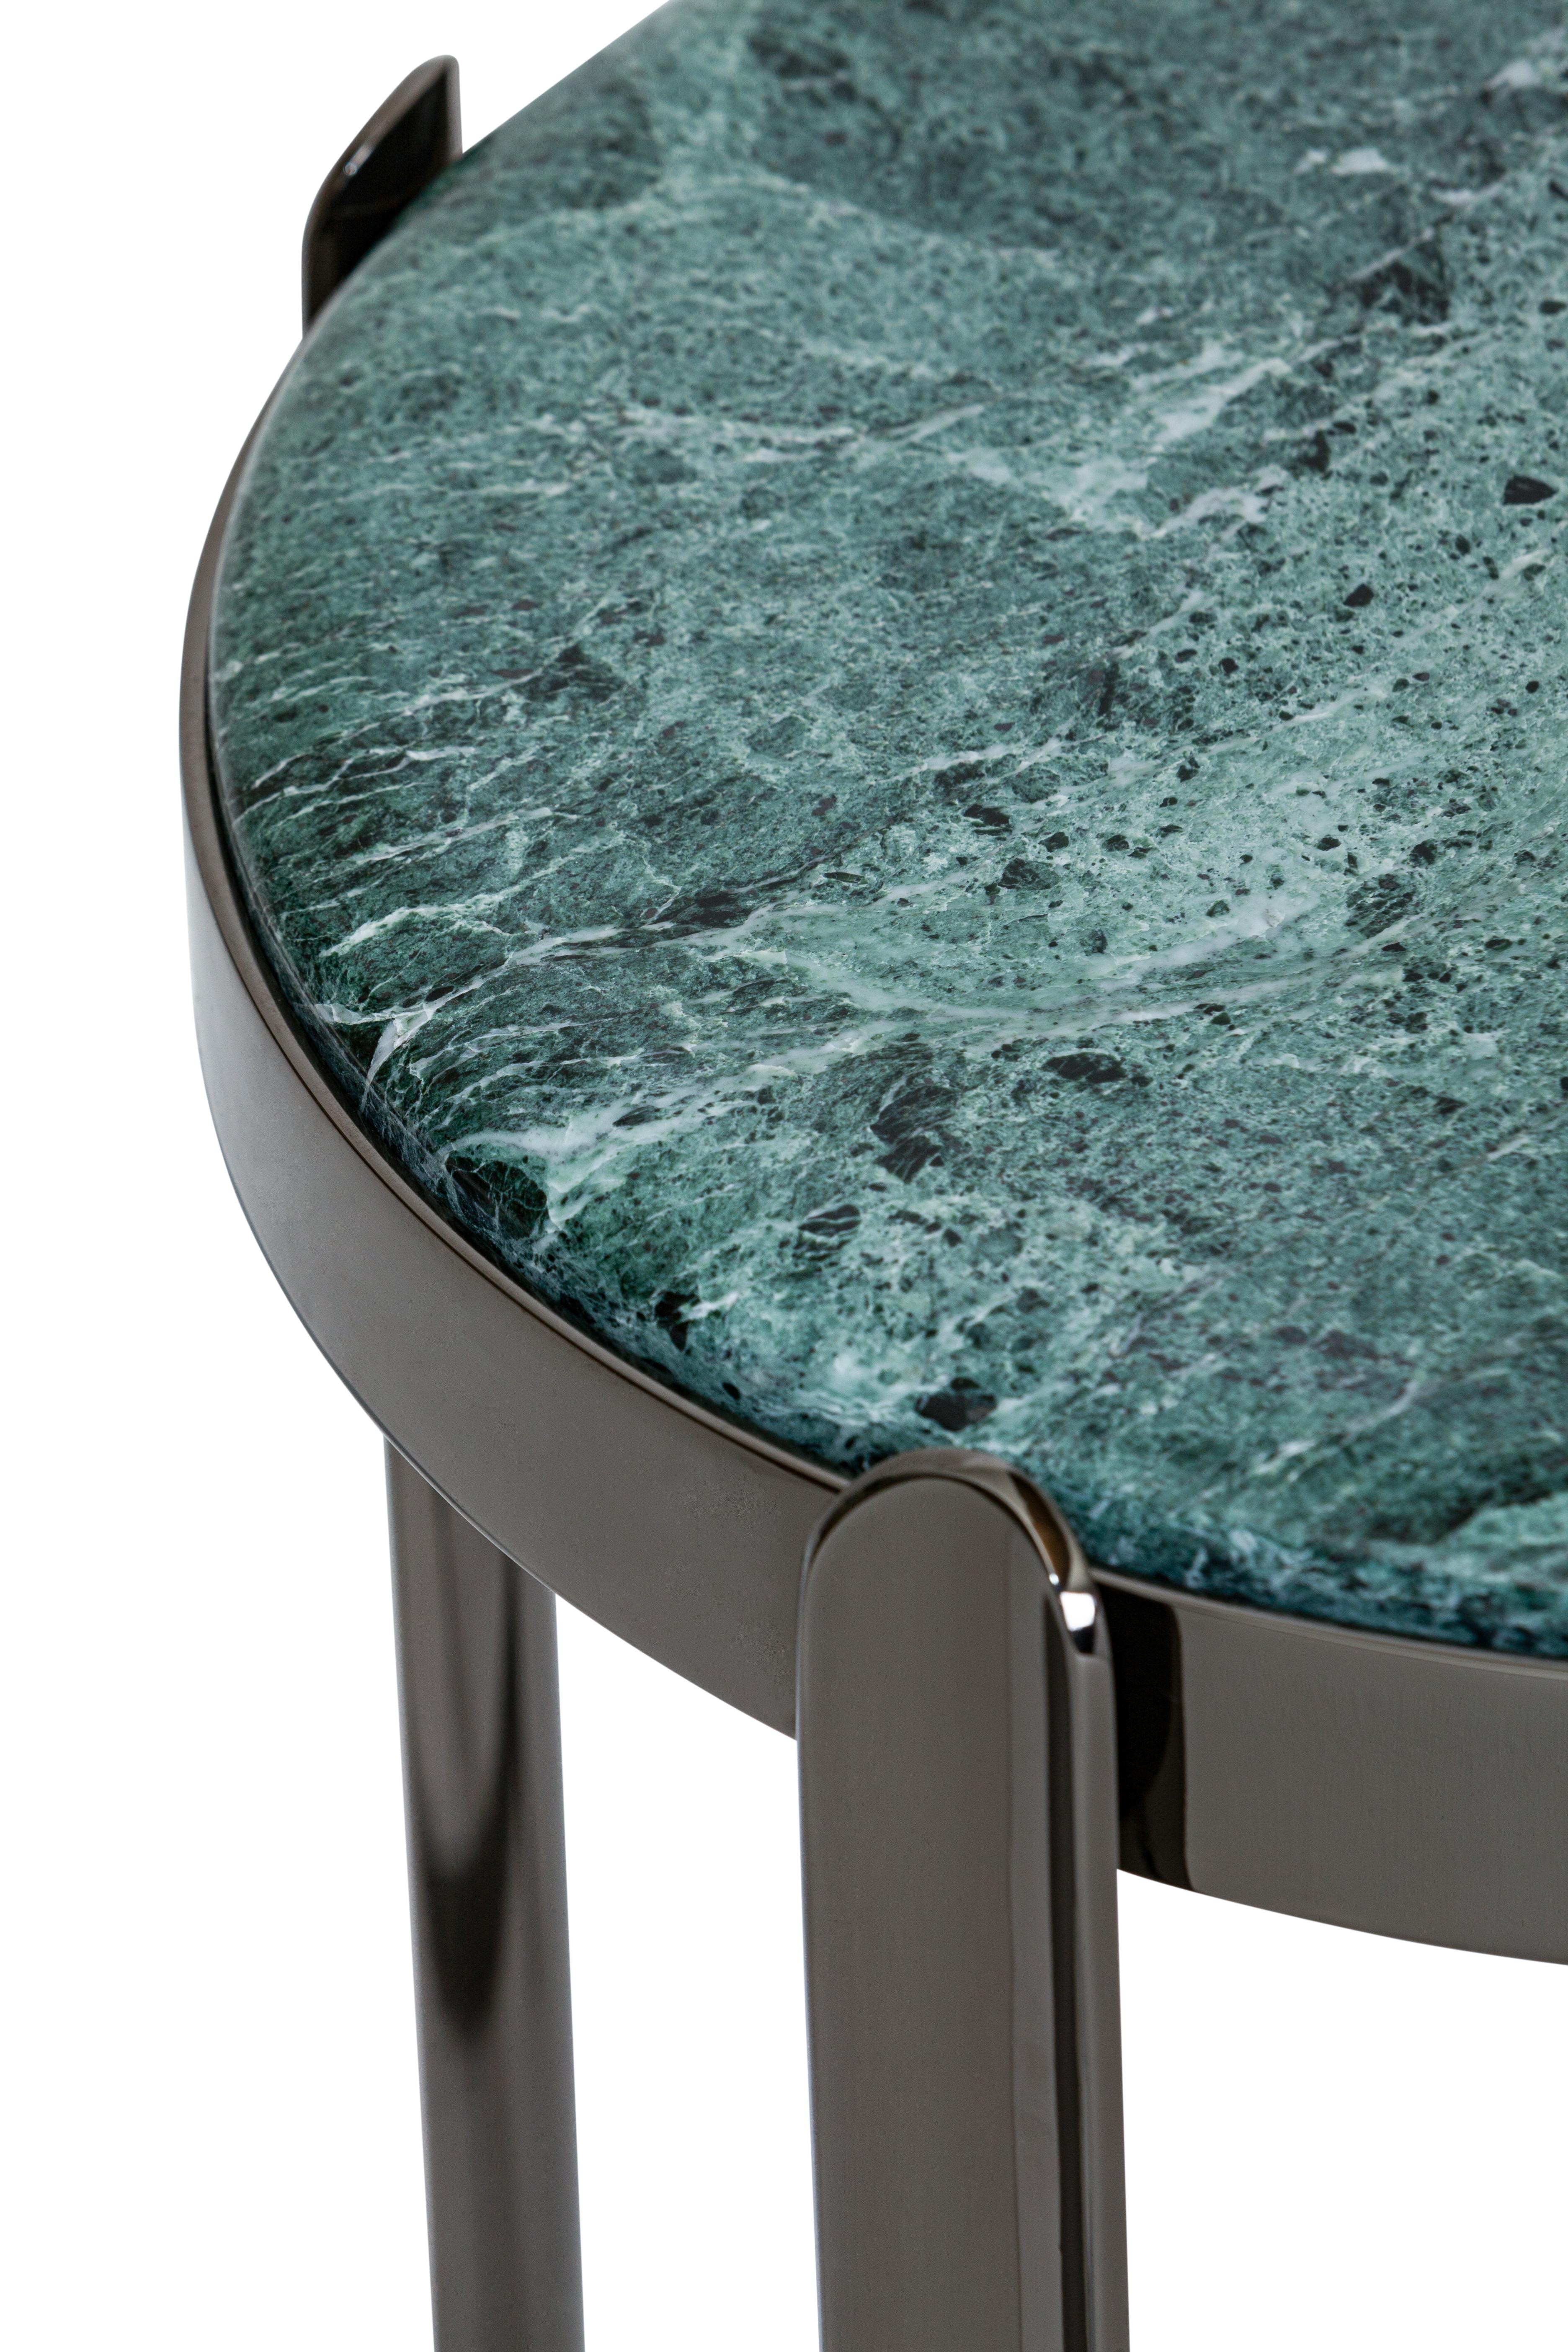 21st Century Art Déco Elie Saab Maison Alpine Green Nickel Side Table, Italy

Named after its strategic position in interiors, the Zenith low tables and consoles add a refined and contemporary glamour to each room. Series of low tables, consoles and